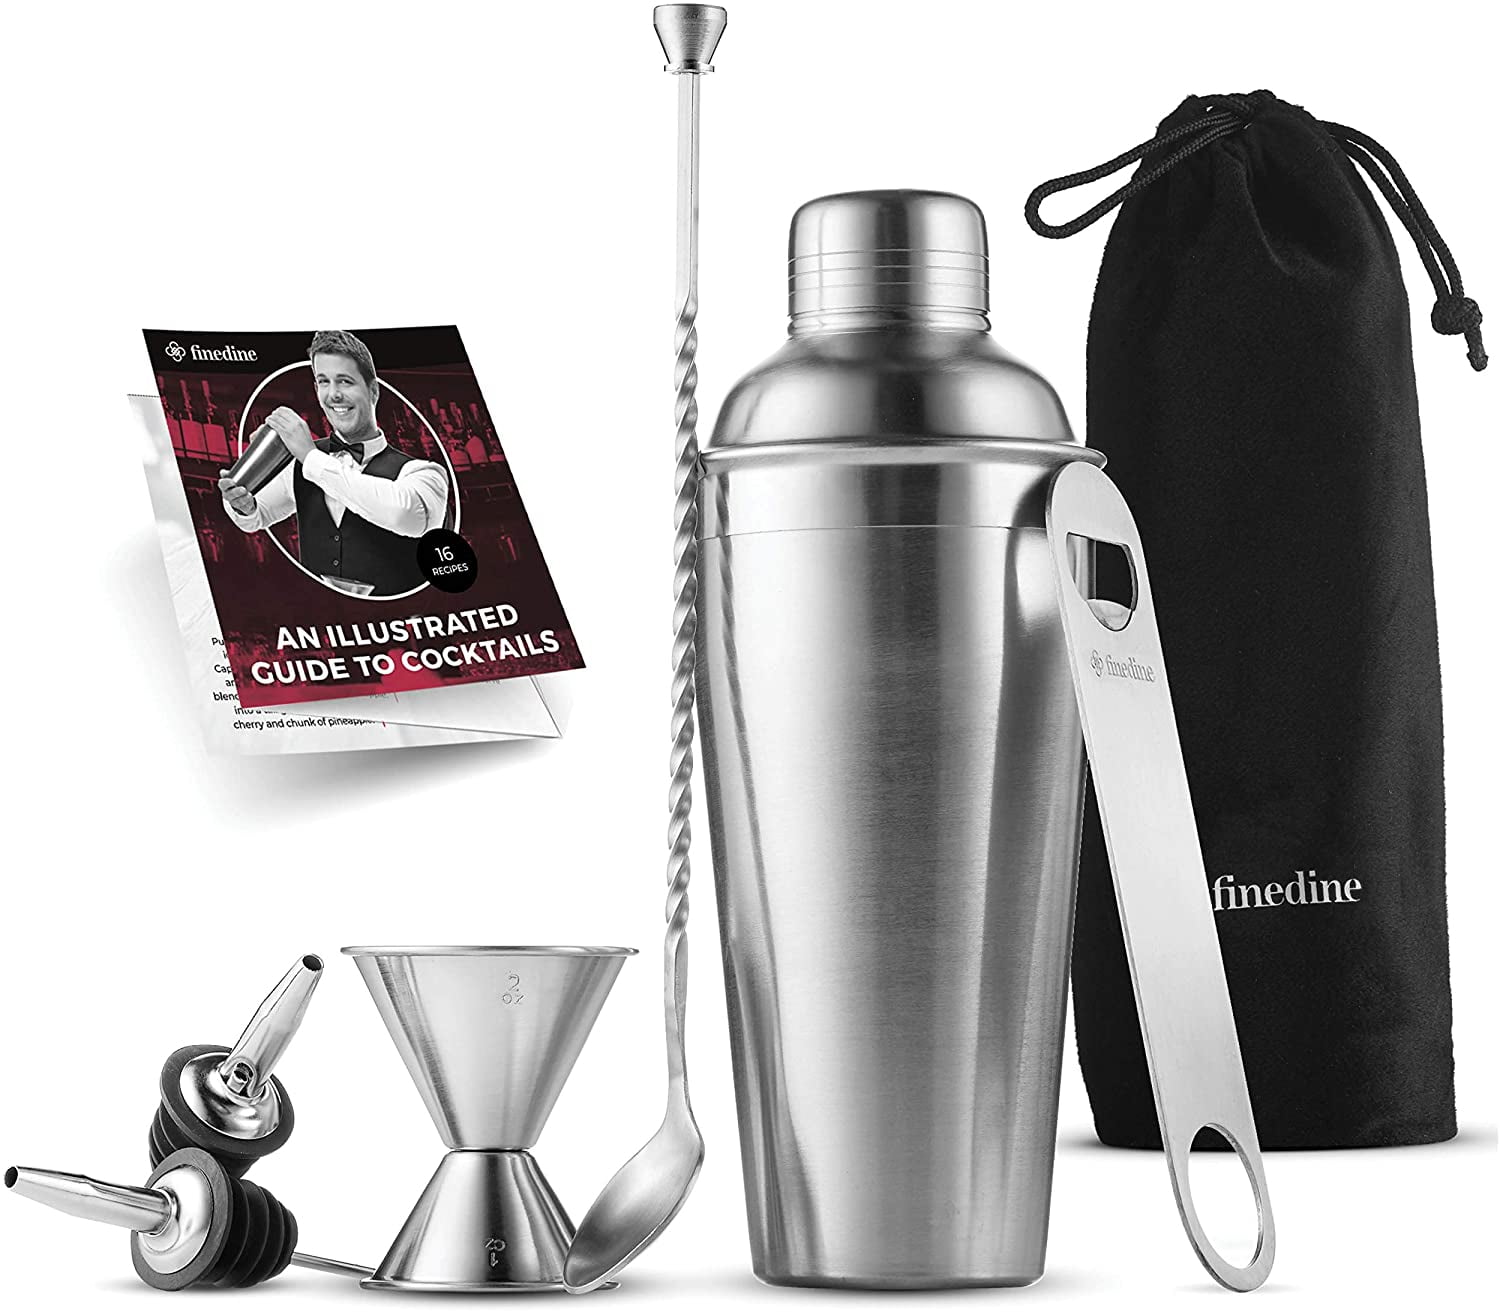 Double Sided Jigger Muddler Free 1000 Cocktail Recipes PDF Buddy 16-Piece Wine and Cocktail Mixing Bar Set–Bartender Kit w/Essential Barware Tools-Large 25 oz Stainless Steel Shaker Ice Bucket